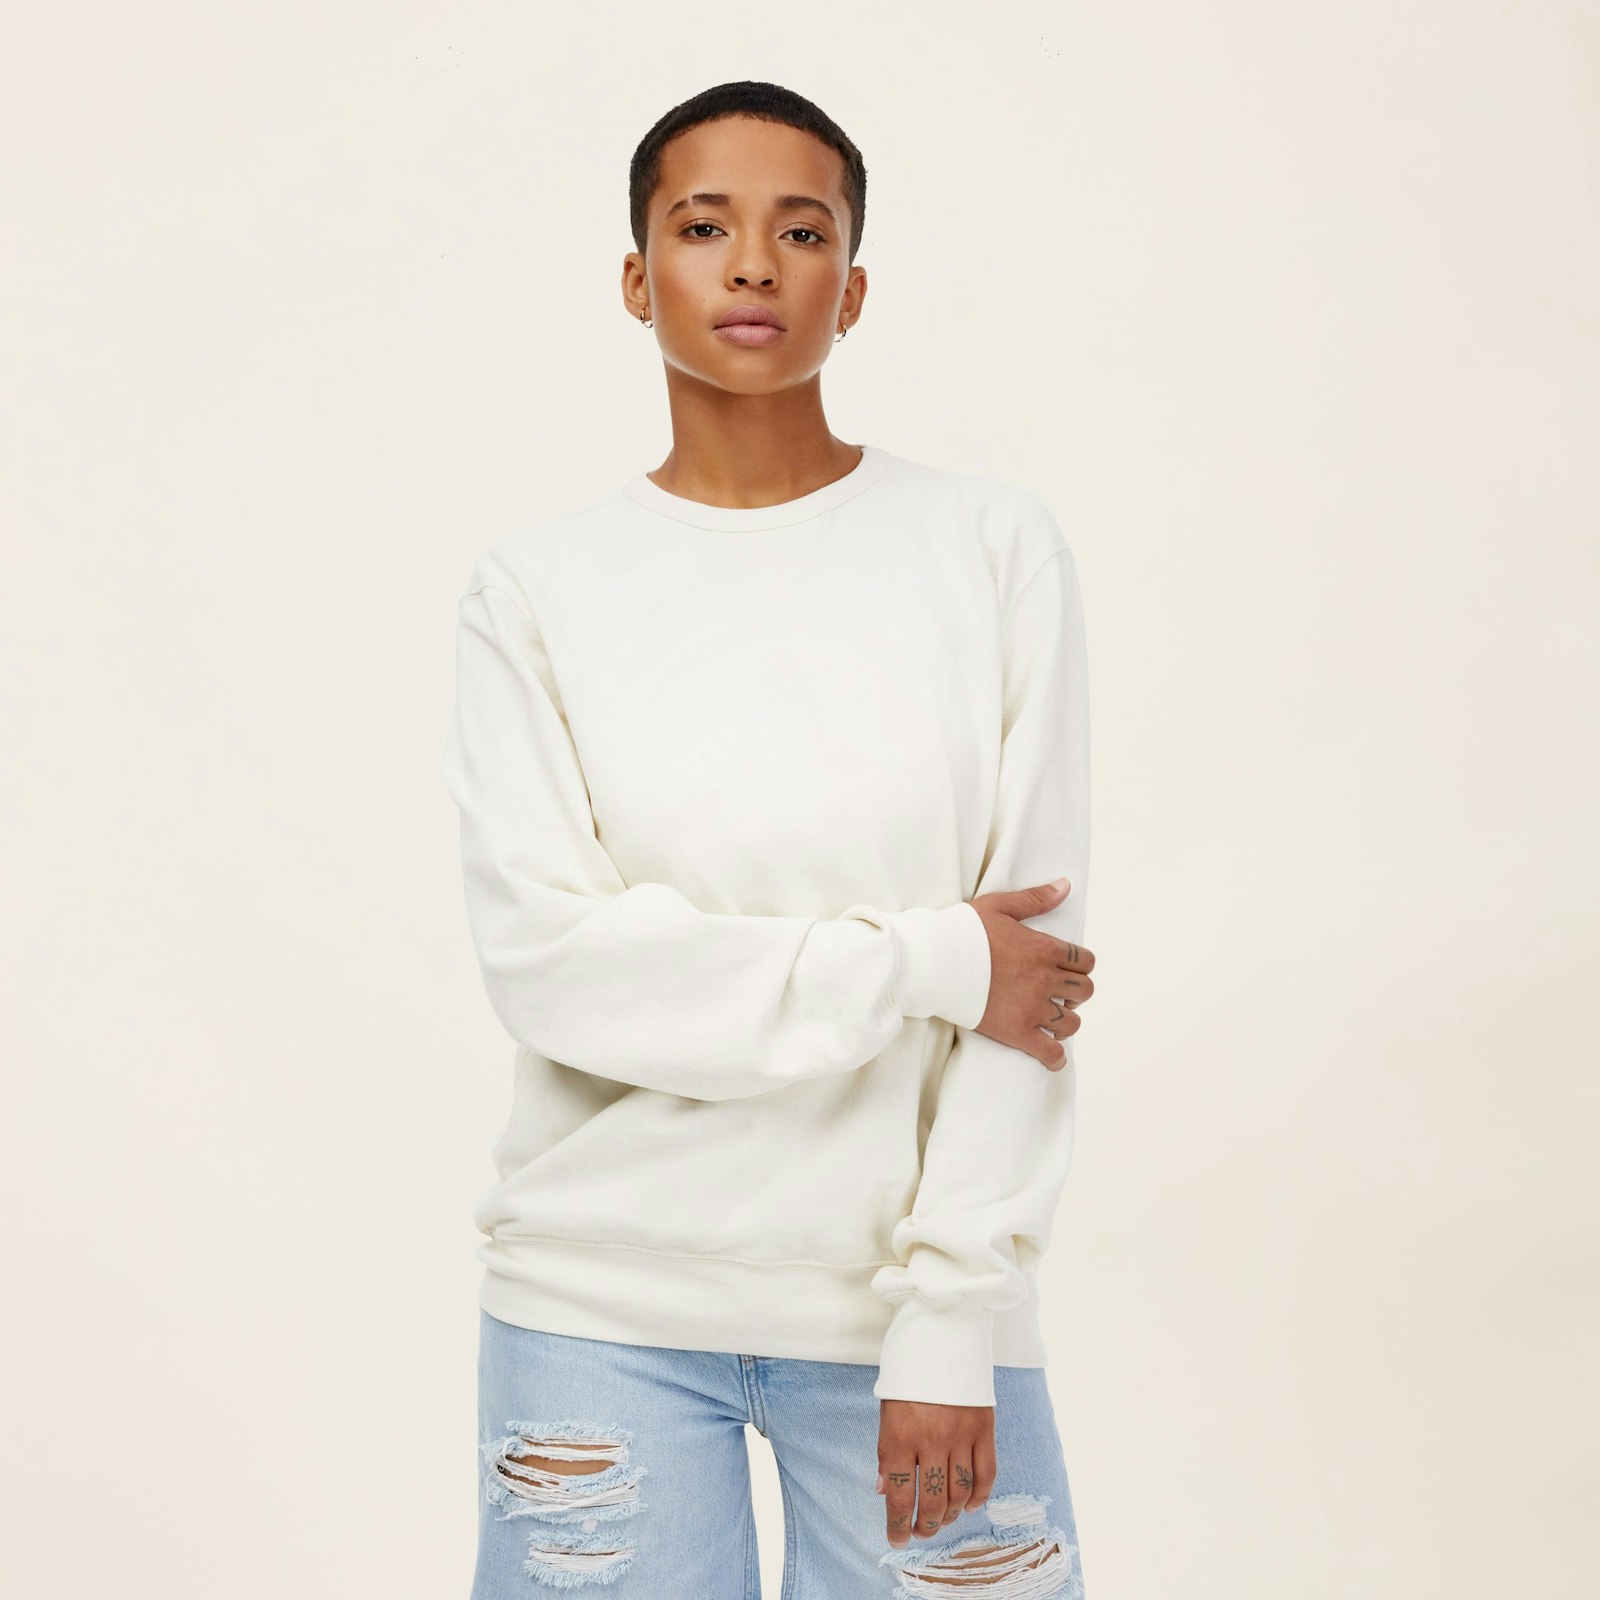 UnisexRecycledTerryPulloverCrew_OffWhite_Womens_OnFigure_1x1_1135.jpg